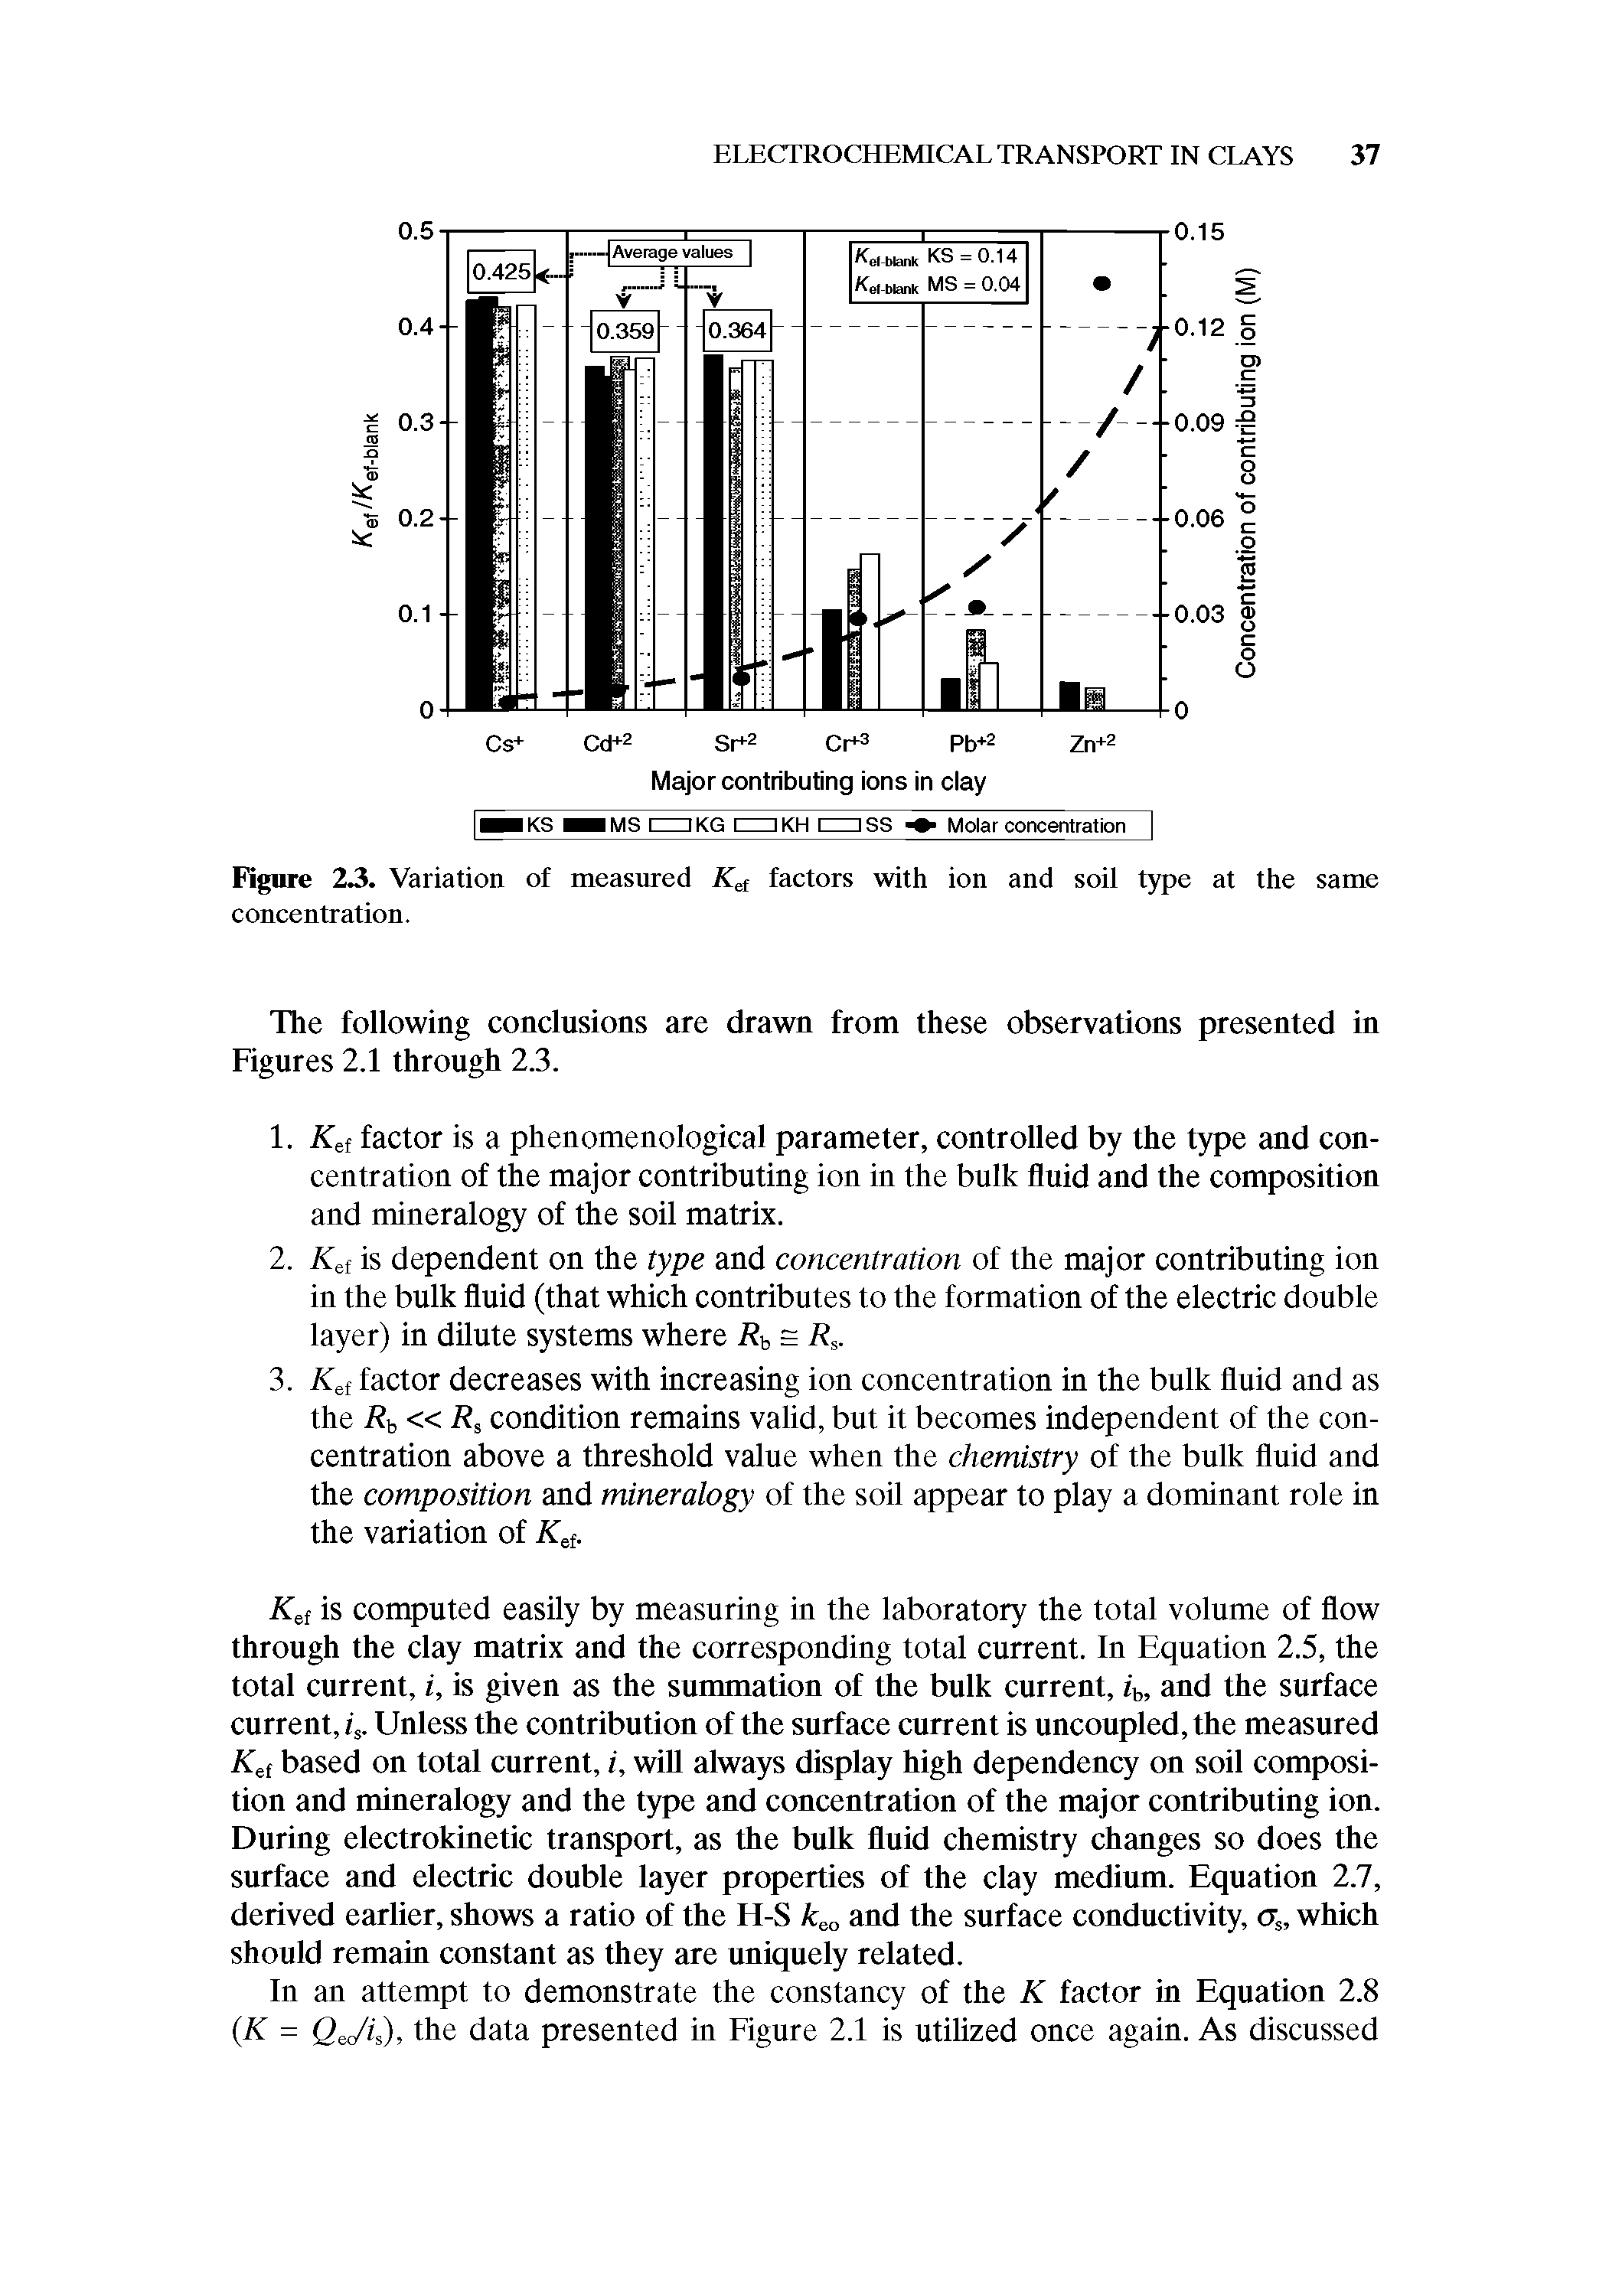 Figure 23. Variation of measured factors with ion and soil type at the same concentration.